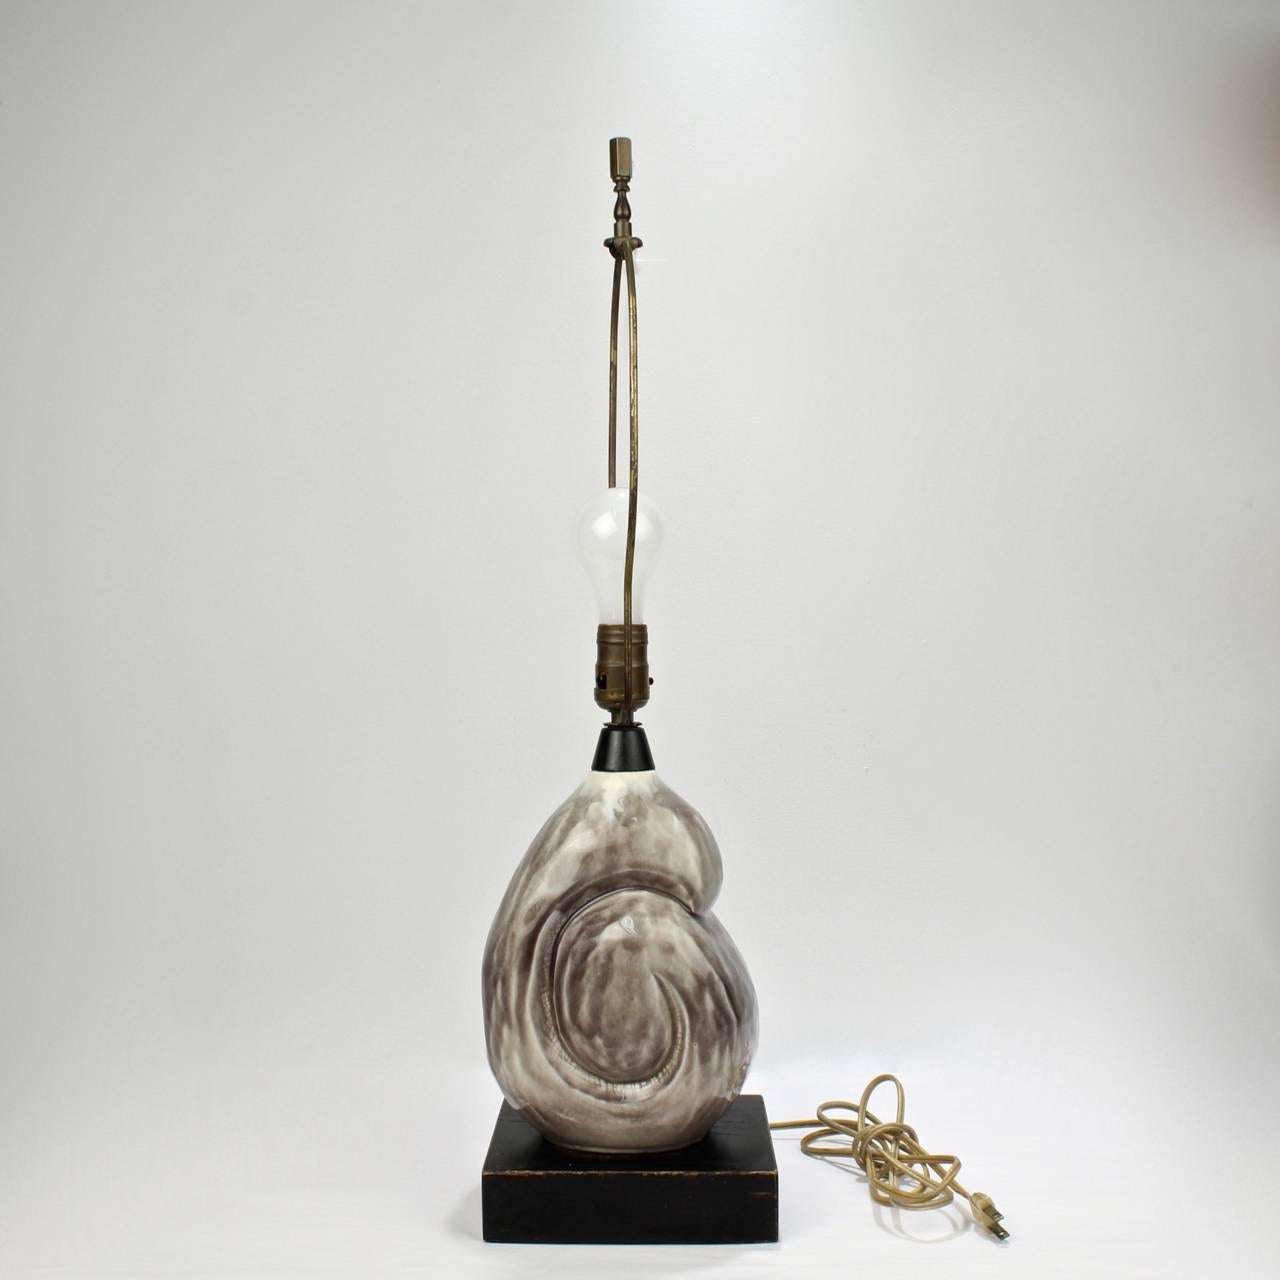 A Mid-Century Modern pottery lamp with a grey-tone nautilus-form top by Yasha Heifetz.

Mounted on a black painted wooden base. 

Stamped Heifetz to base.

Height including fixture: ca. 26 3/4 in.

Retains its original factory wiring and